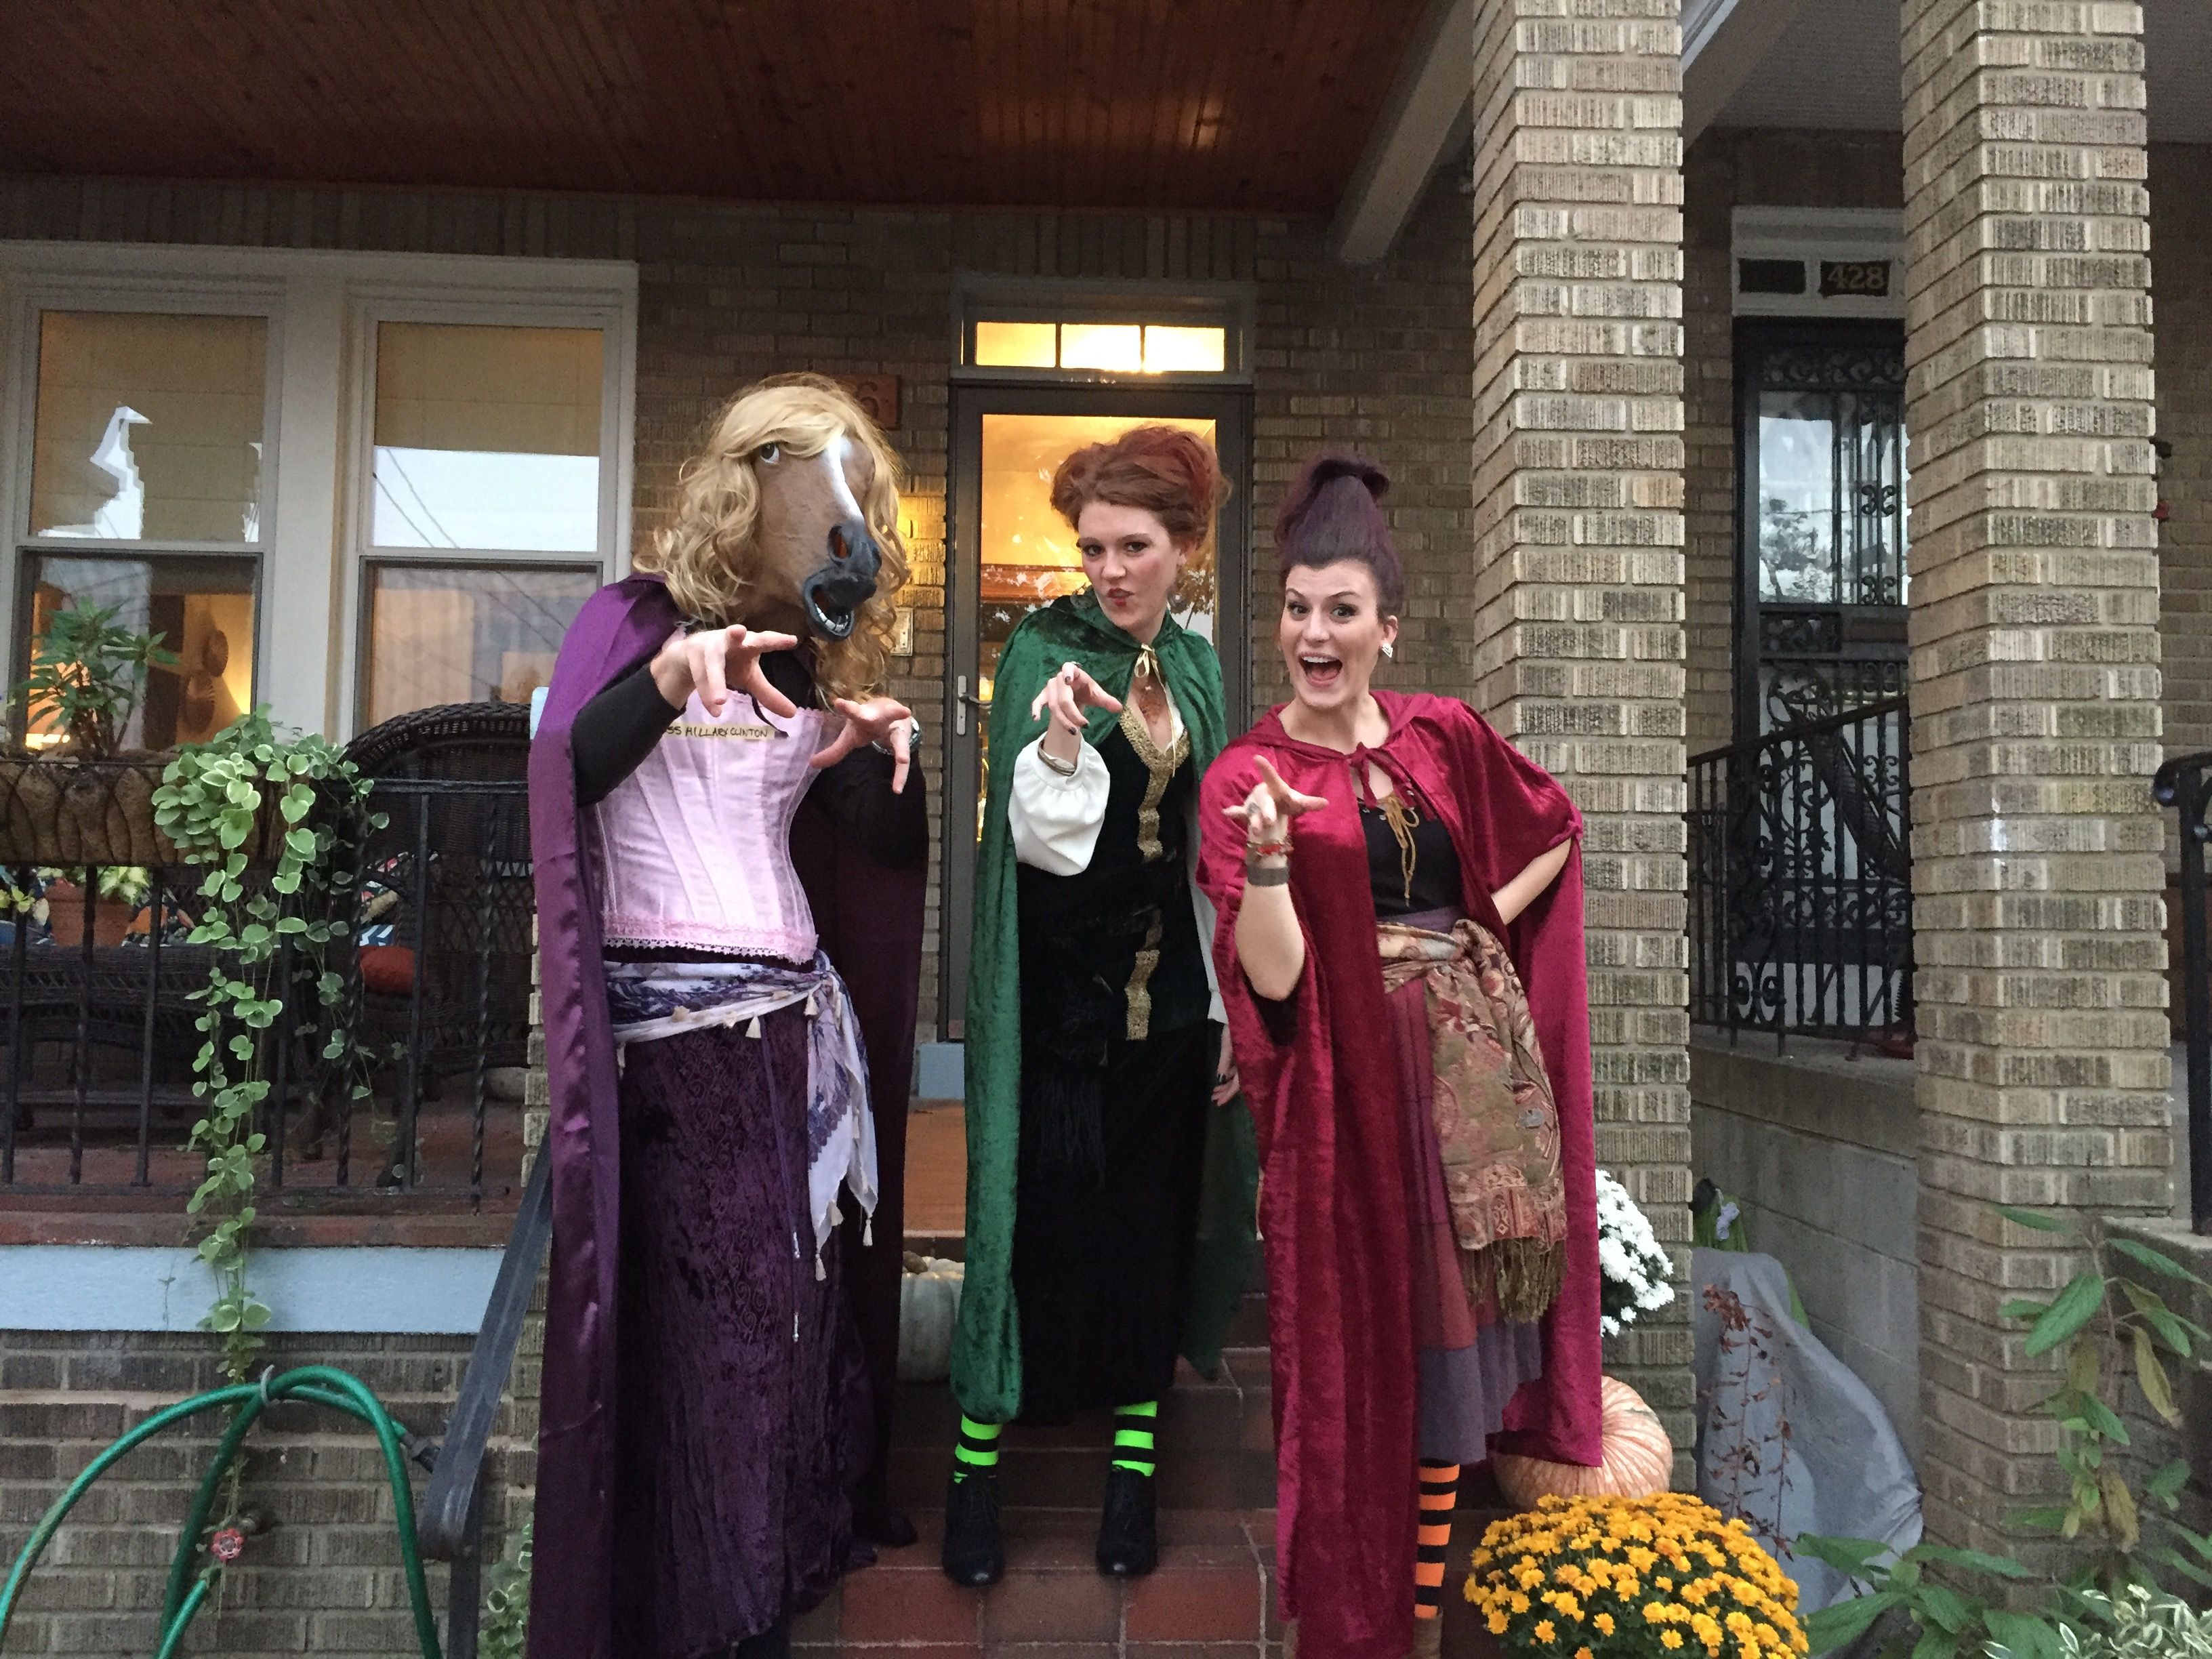 My wife, sister-in-law, and I were the witches from Hocus Pocus.